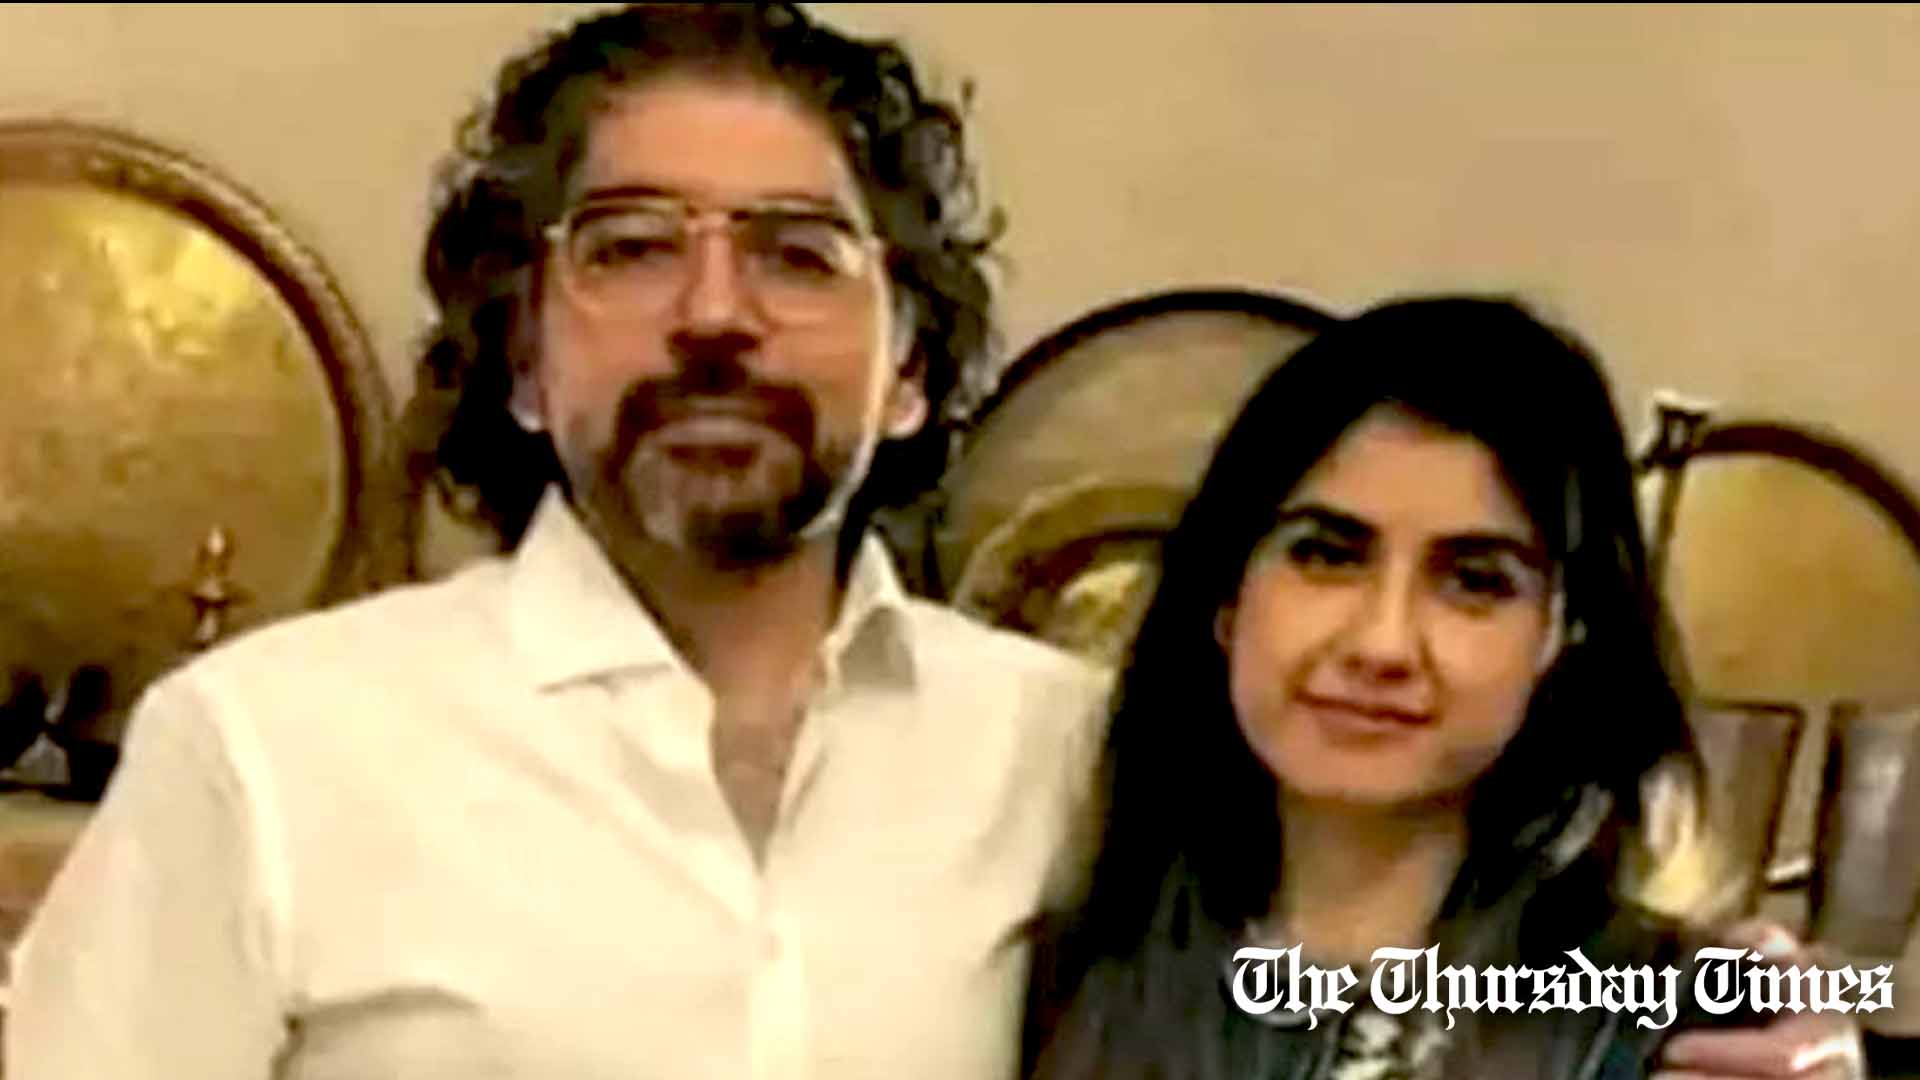 A file photo is shown of Shahnawaz Amir (L) and Sarah Inam (R). — FILE/THE THURSDAY TIMES